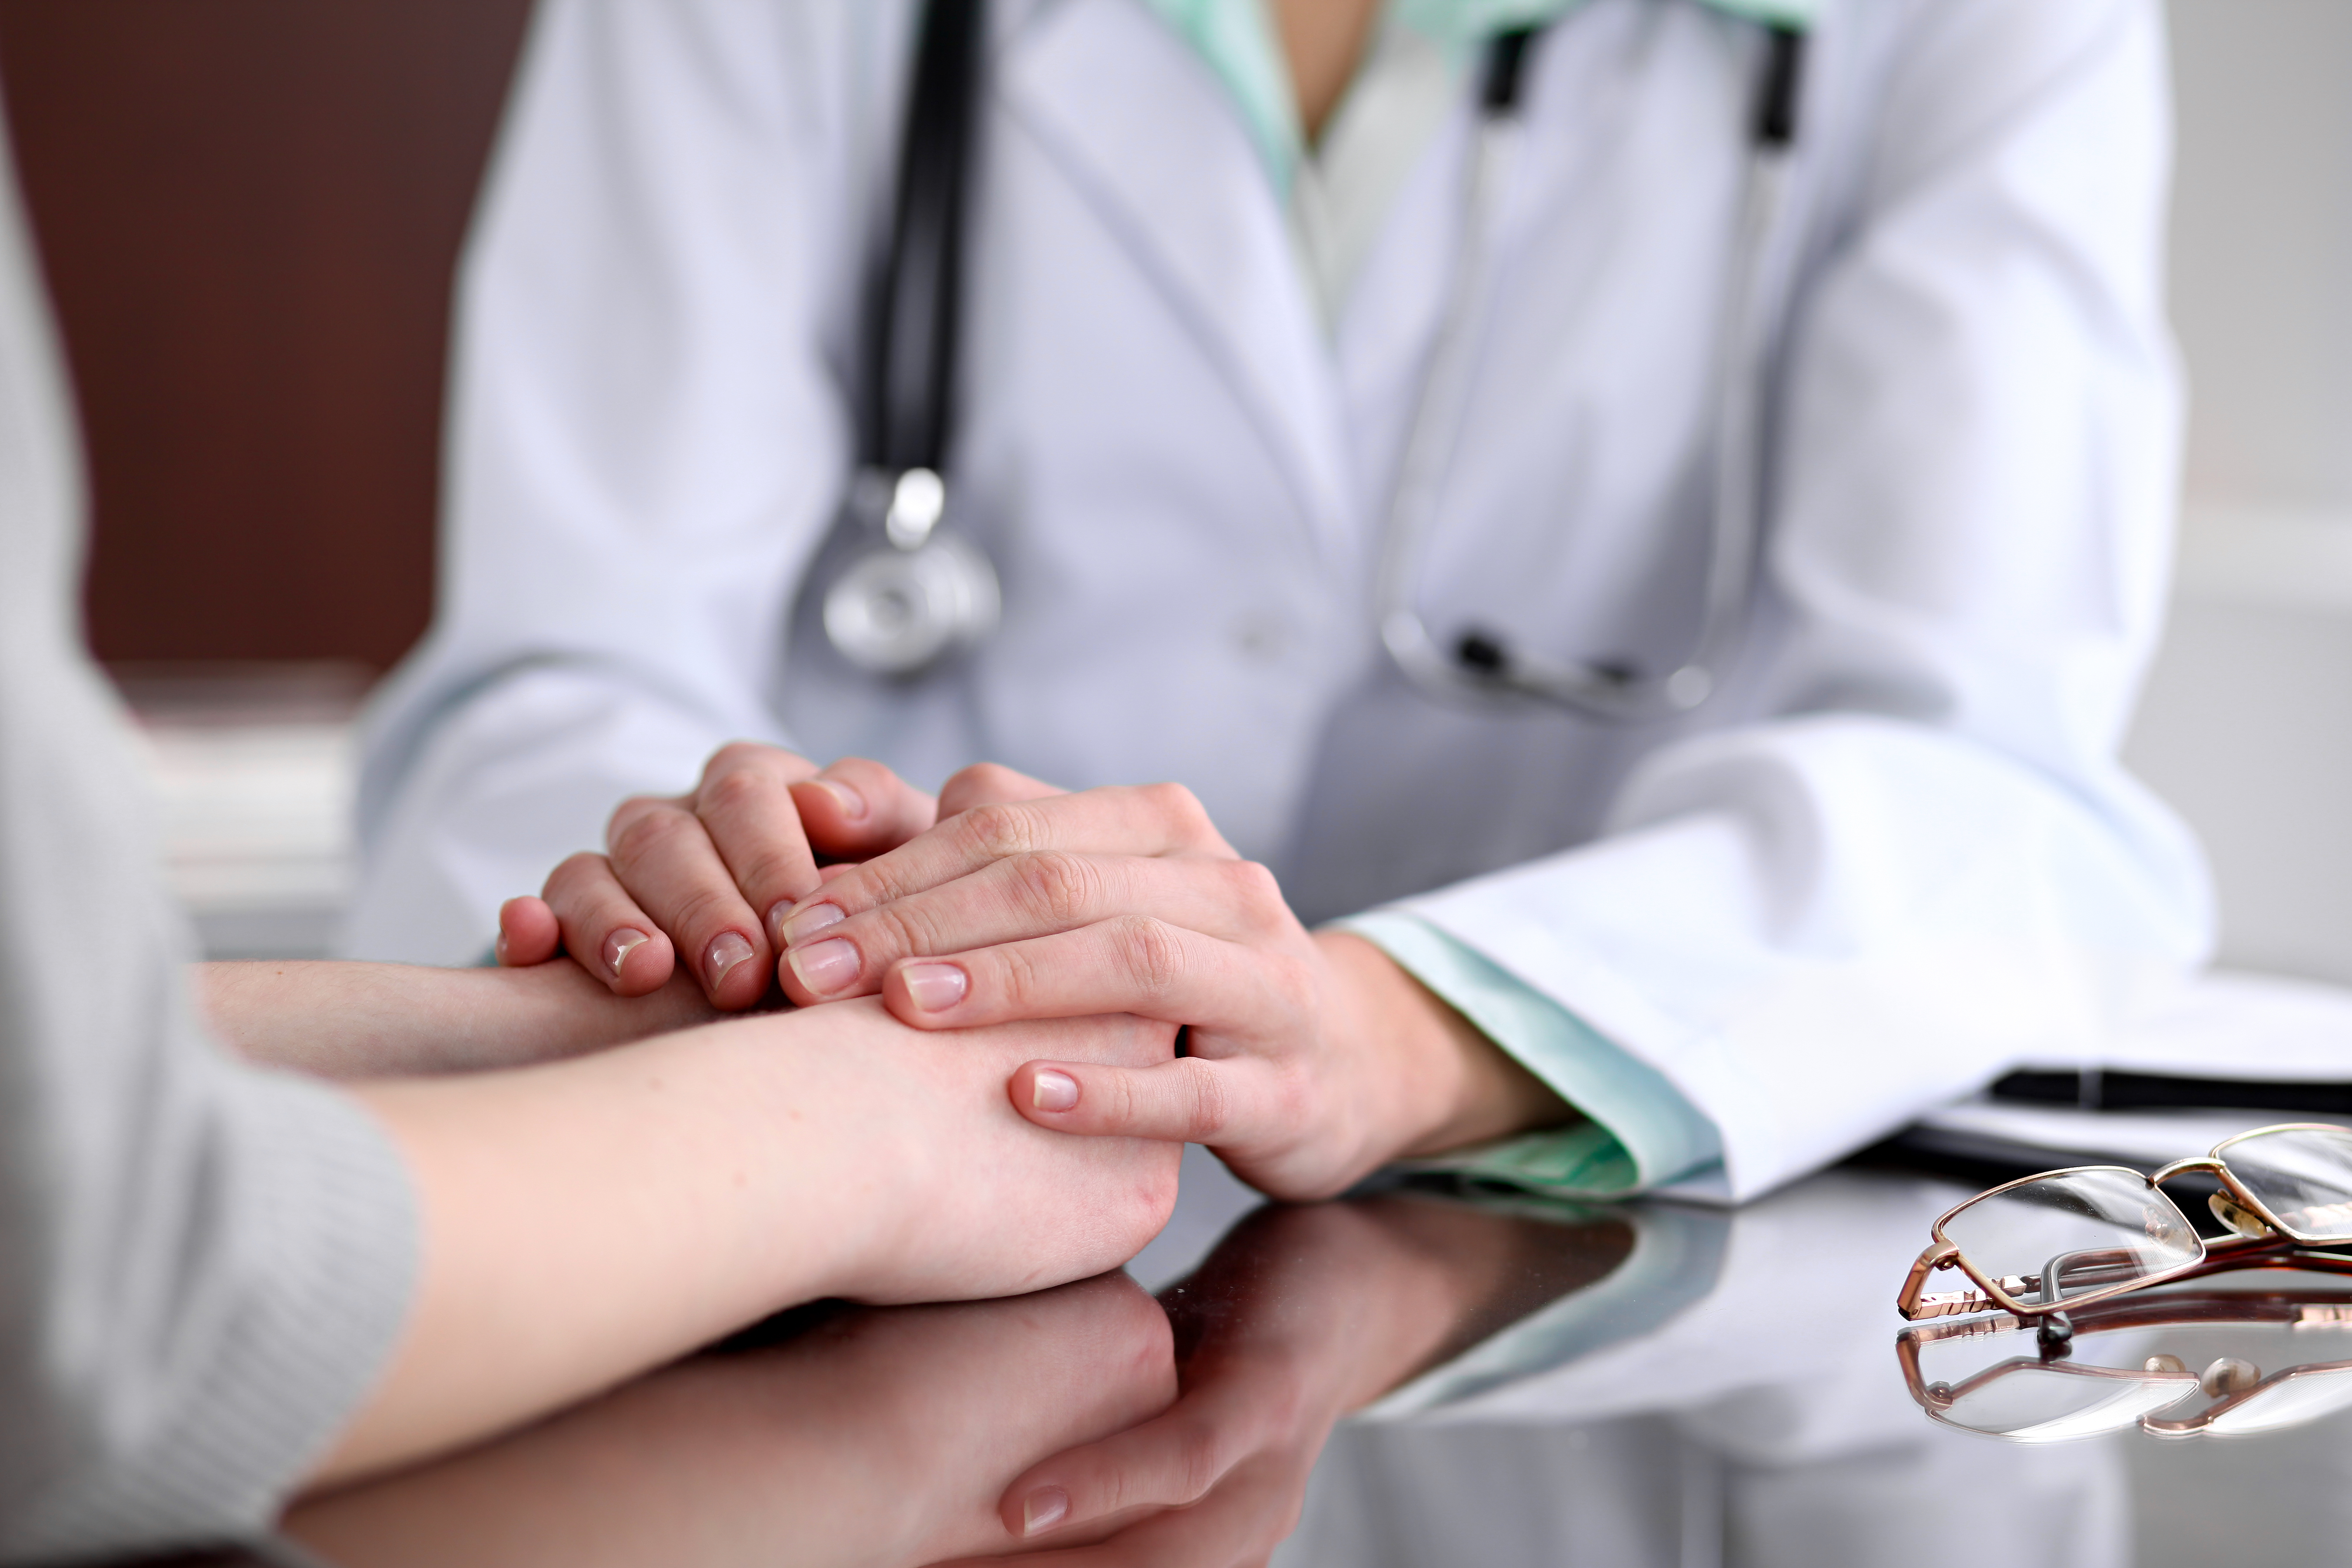 Friendly female doctor hands holding patient hand sitting at the desk for encouragement, empathy, cheering and support while medical examination. | Source: Shutterstock